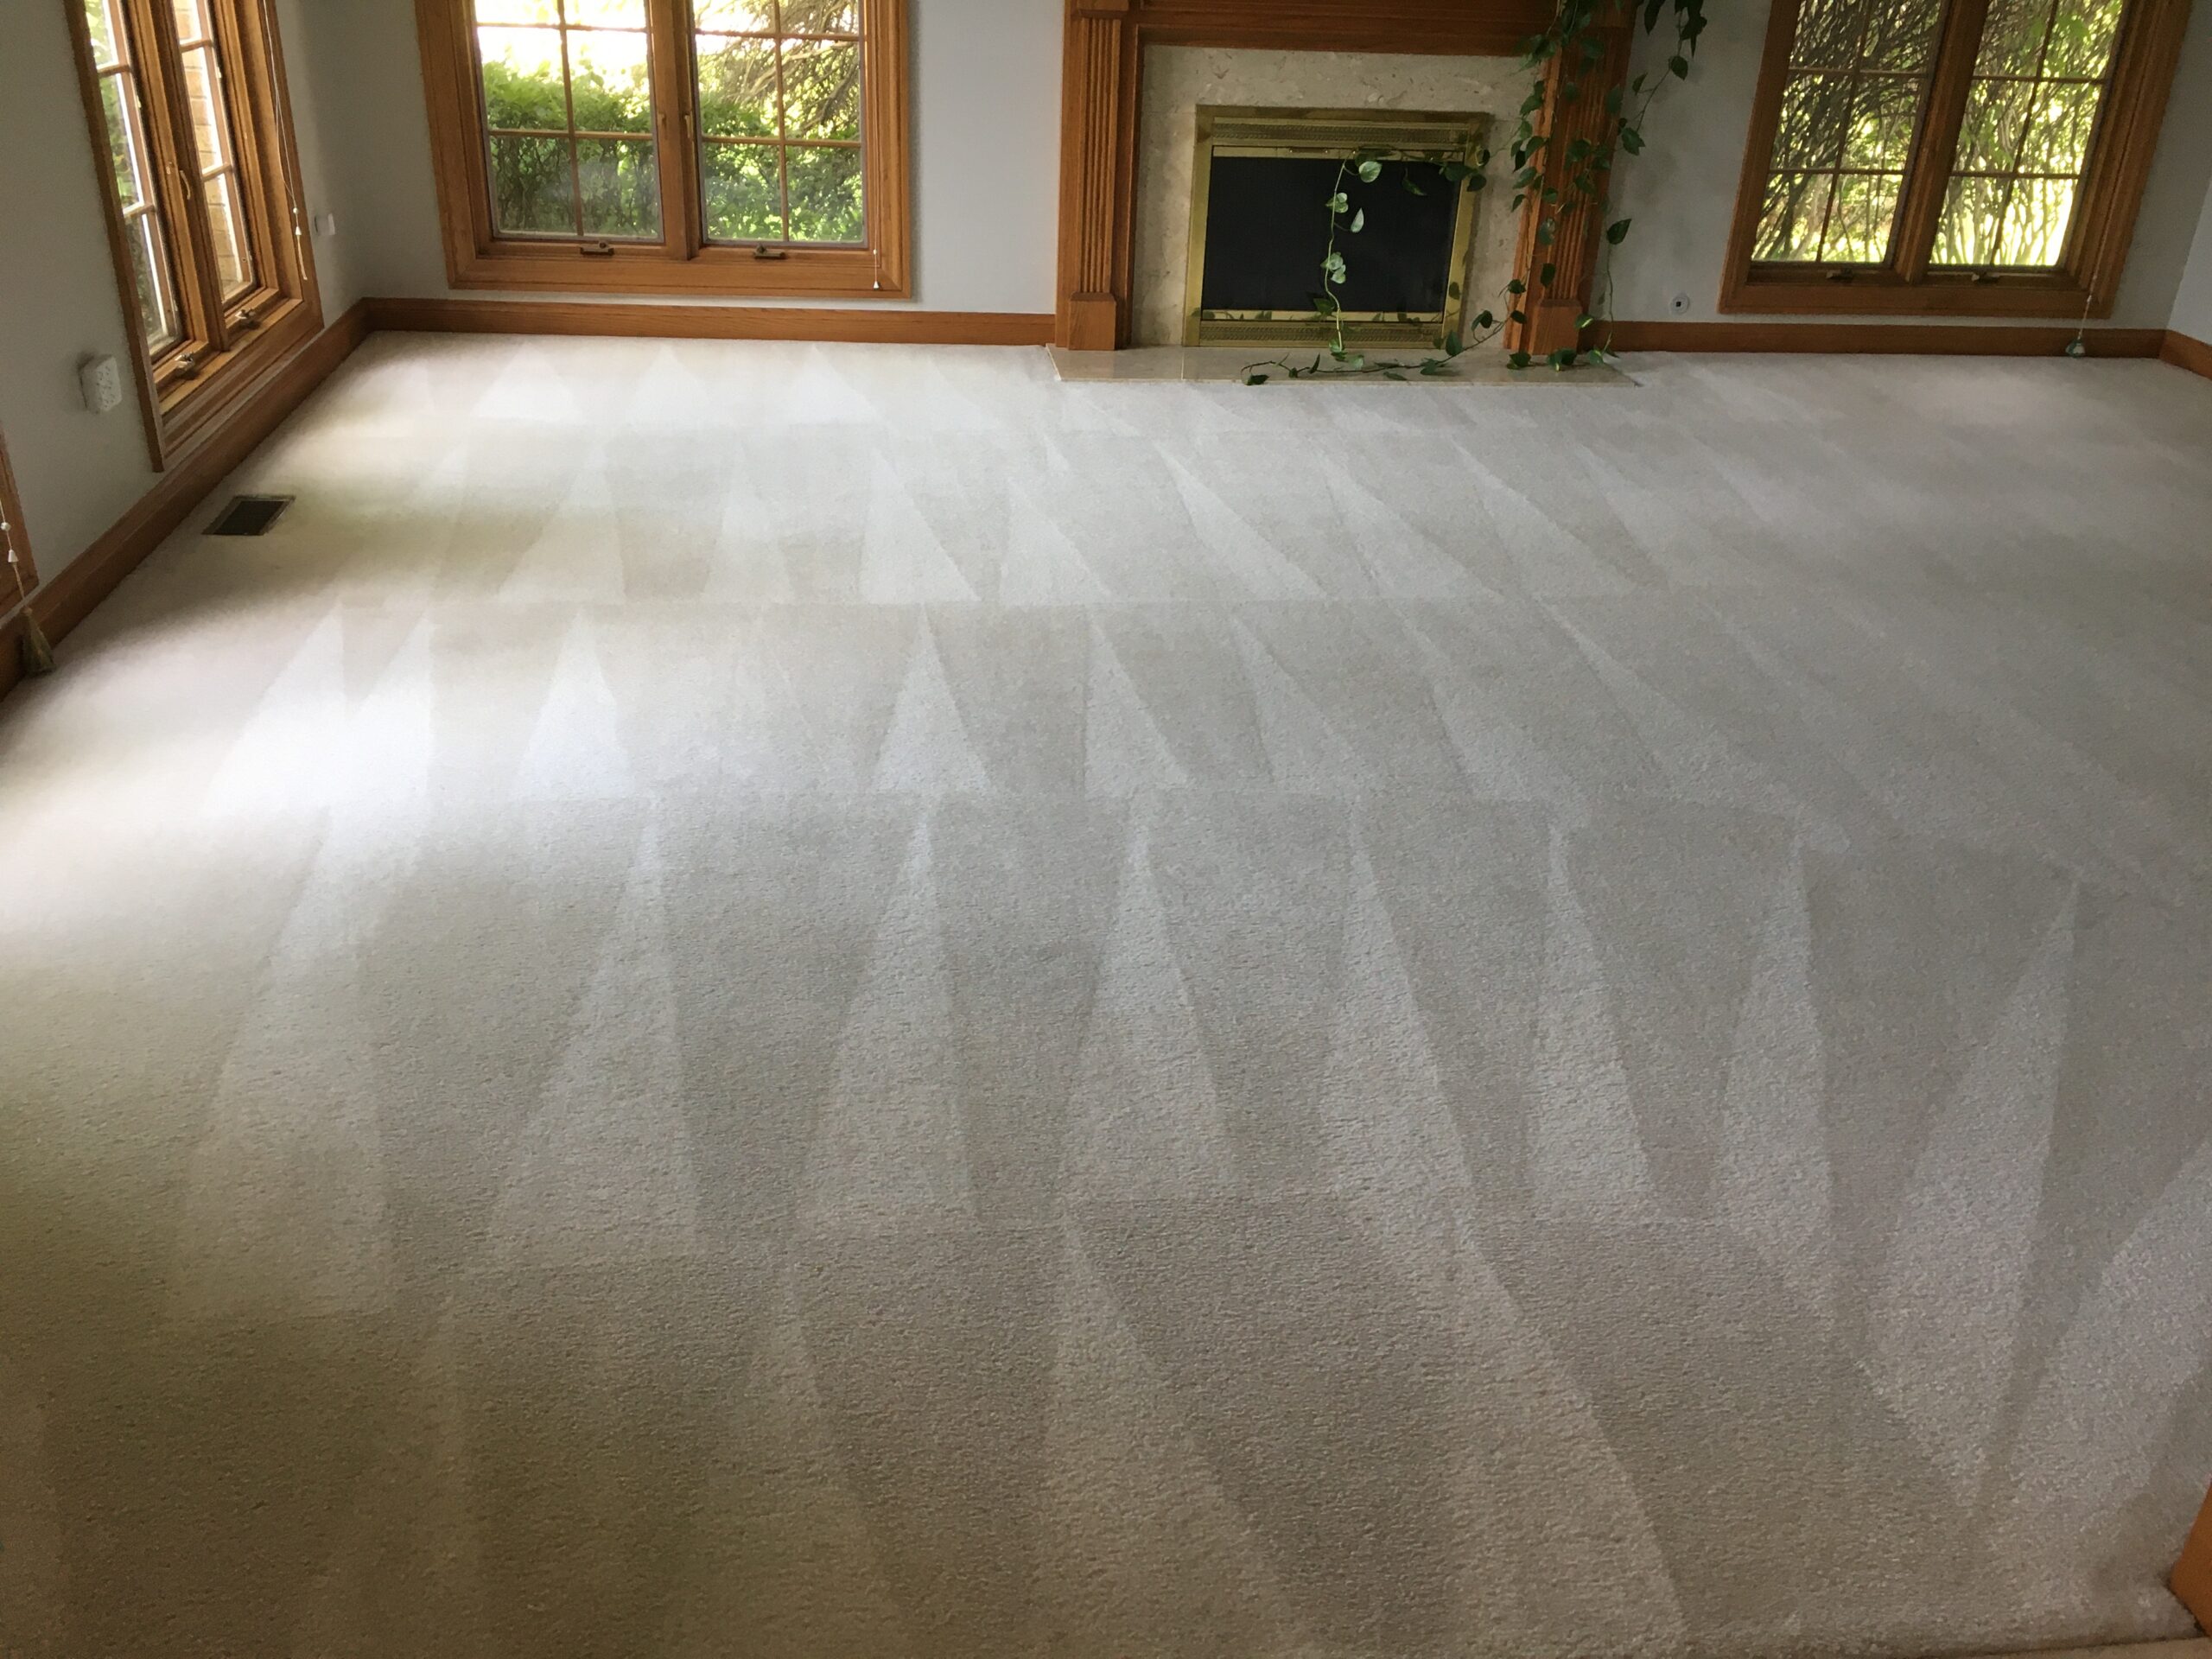 Carpet Cleaning Master Service Pro